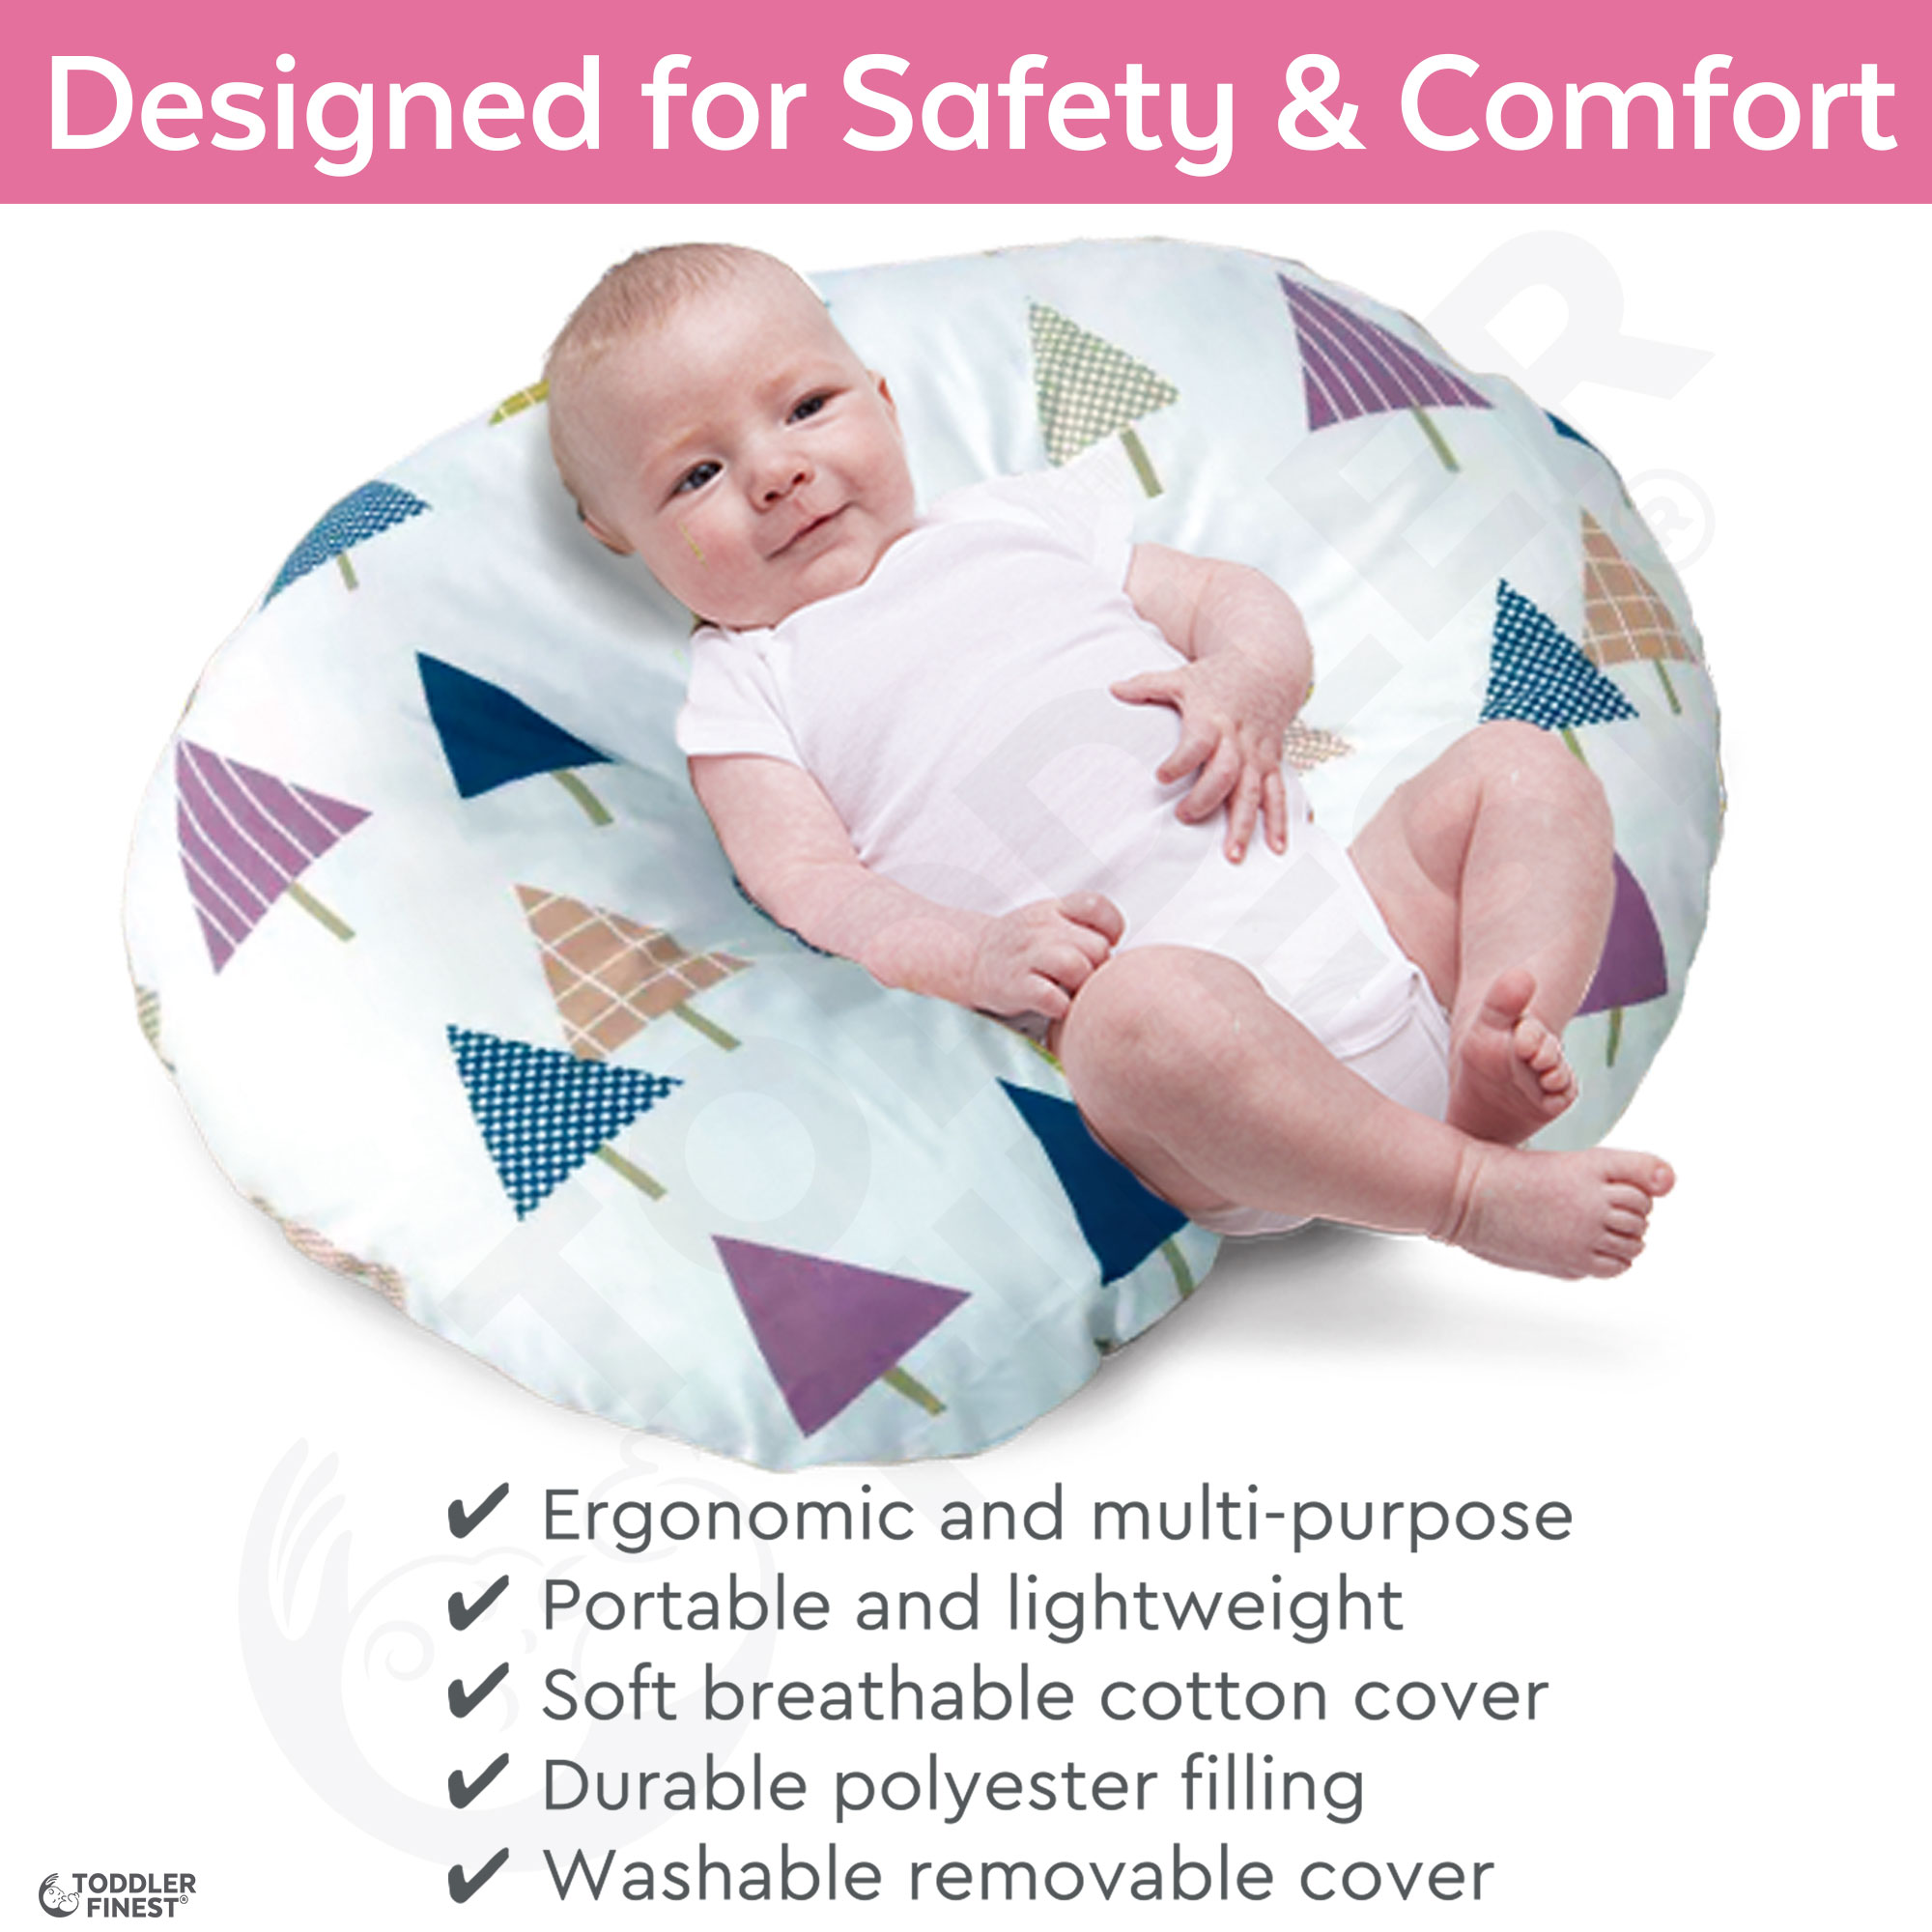 Bacati - 3 PC Space Multicolor Hugster Feeding & Infant Support Nursing Pillow